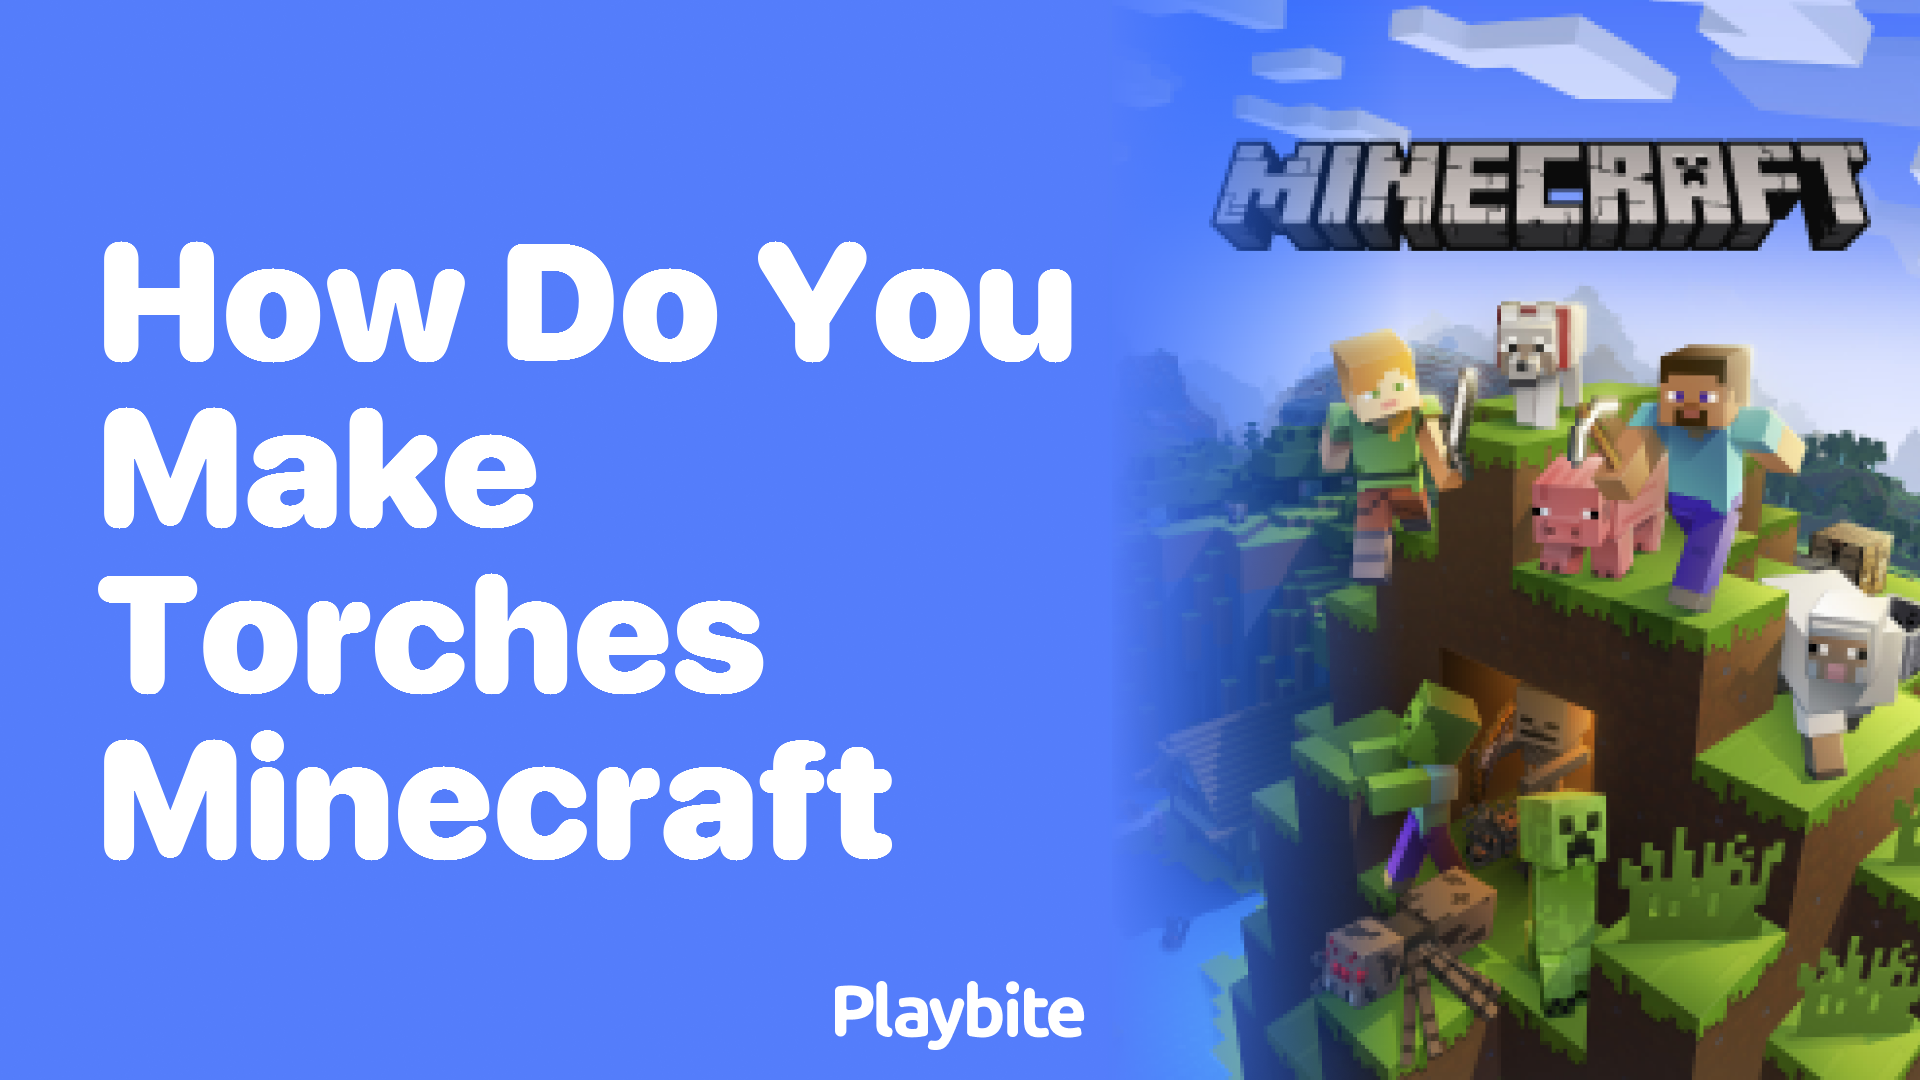 How Do You Make Torches in Minecraft?